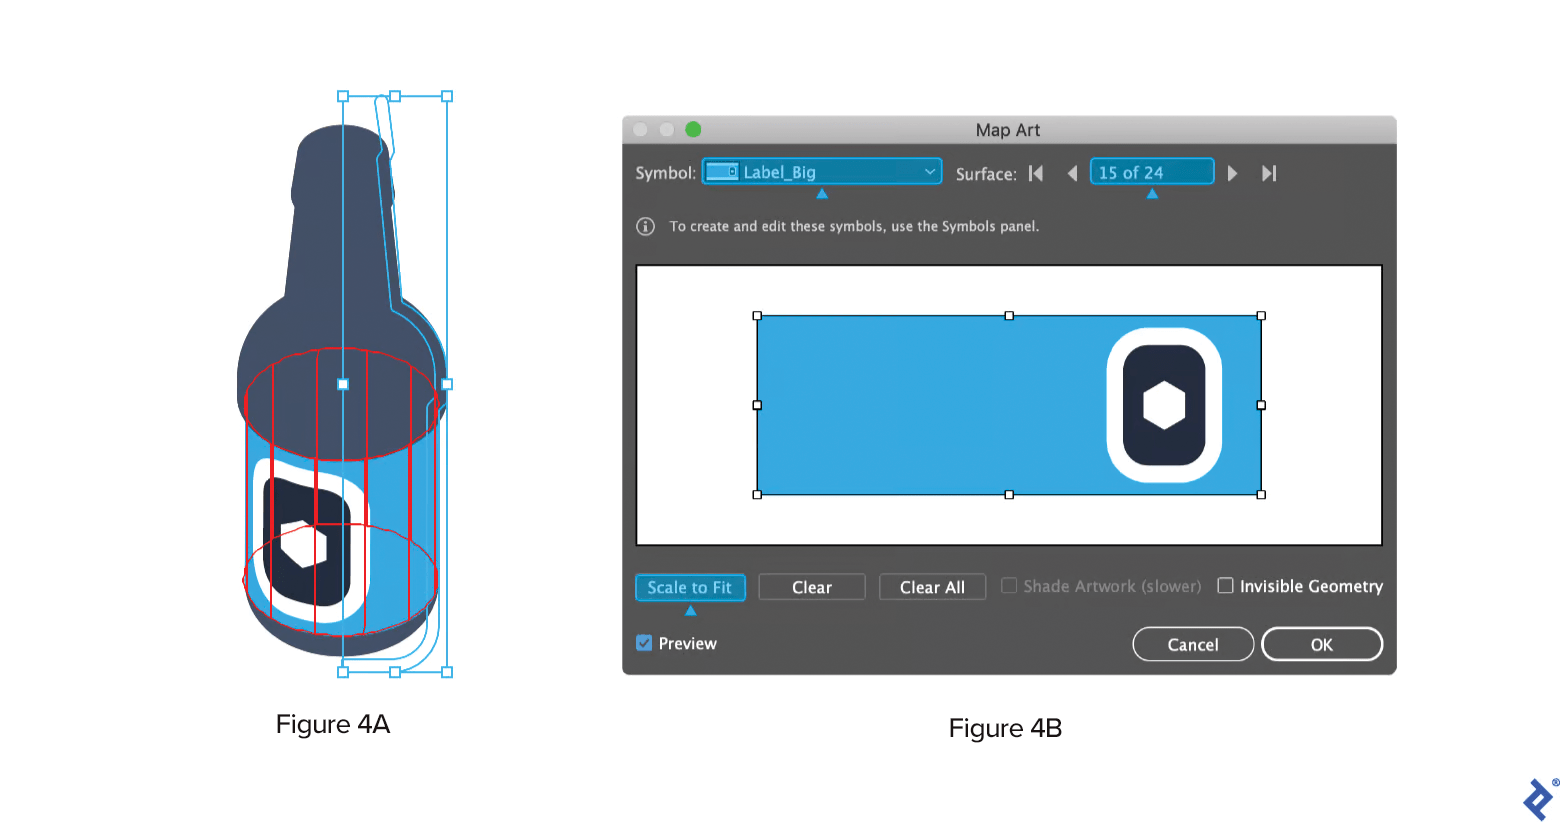 With the Revolve feature, combine the bottle and labels. Use the highlighted settings to map the labels around the bottle.